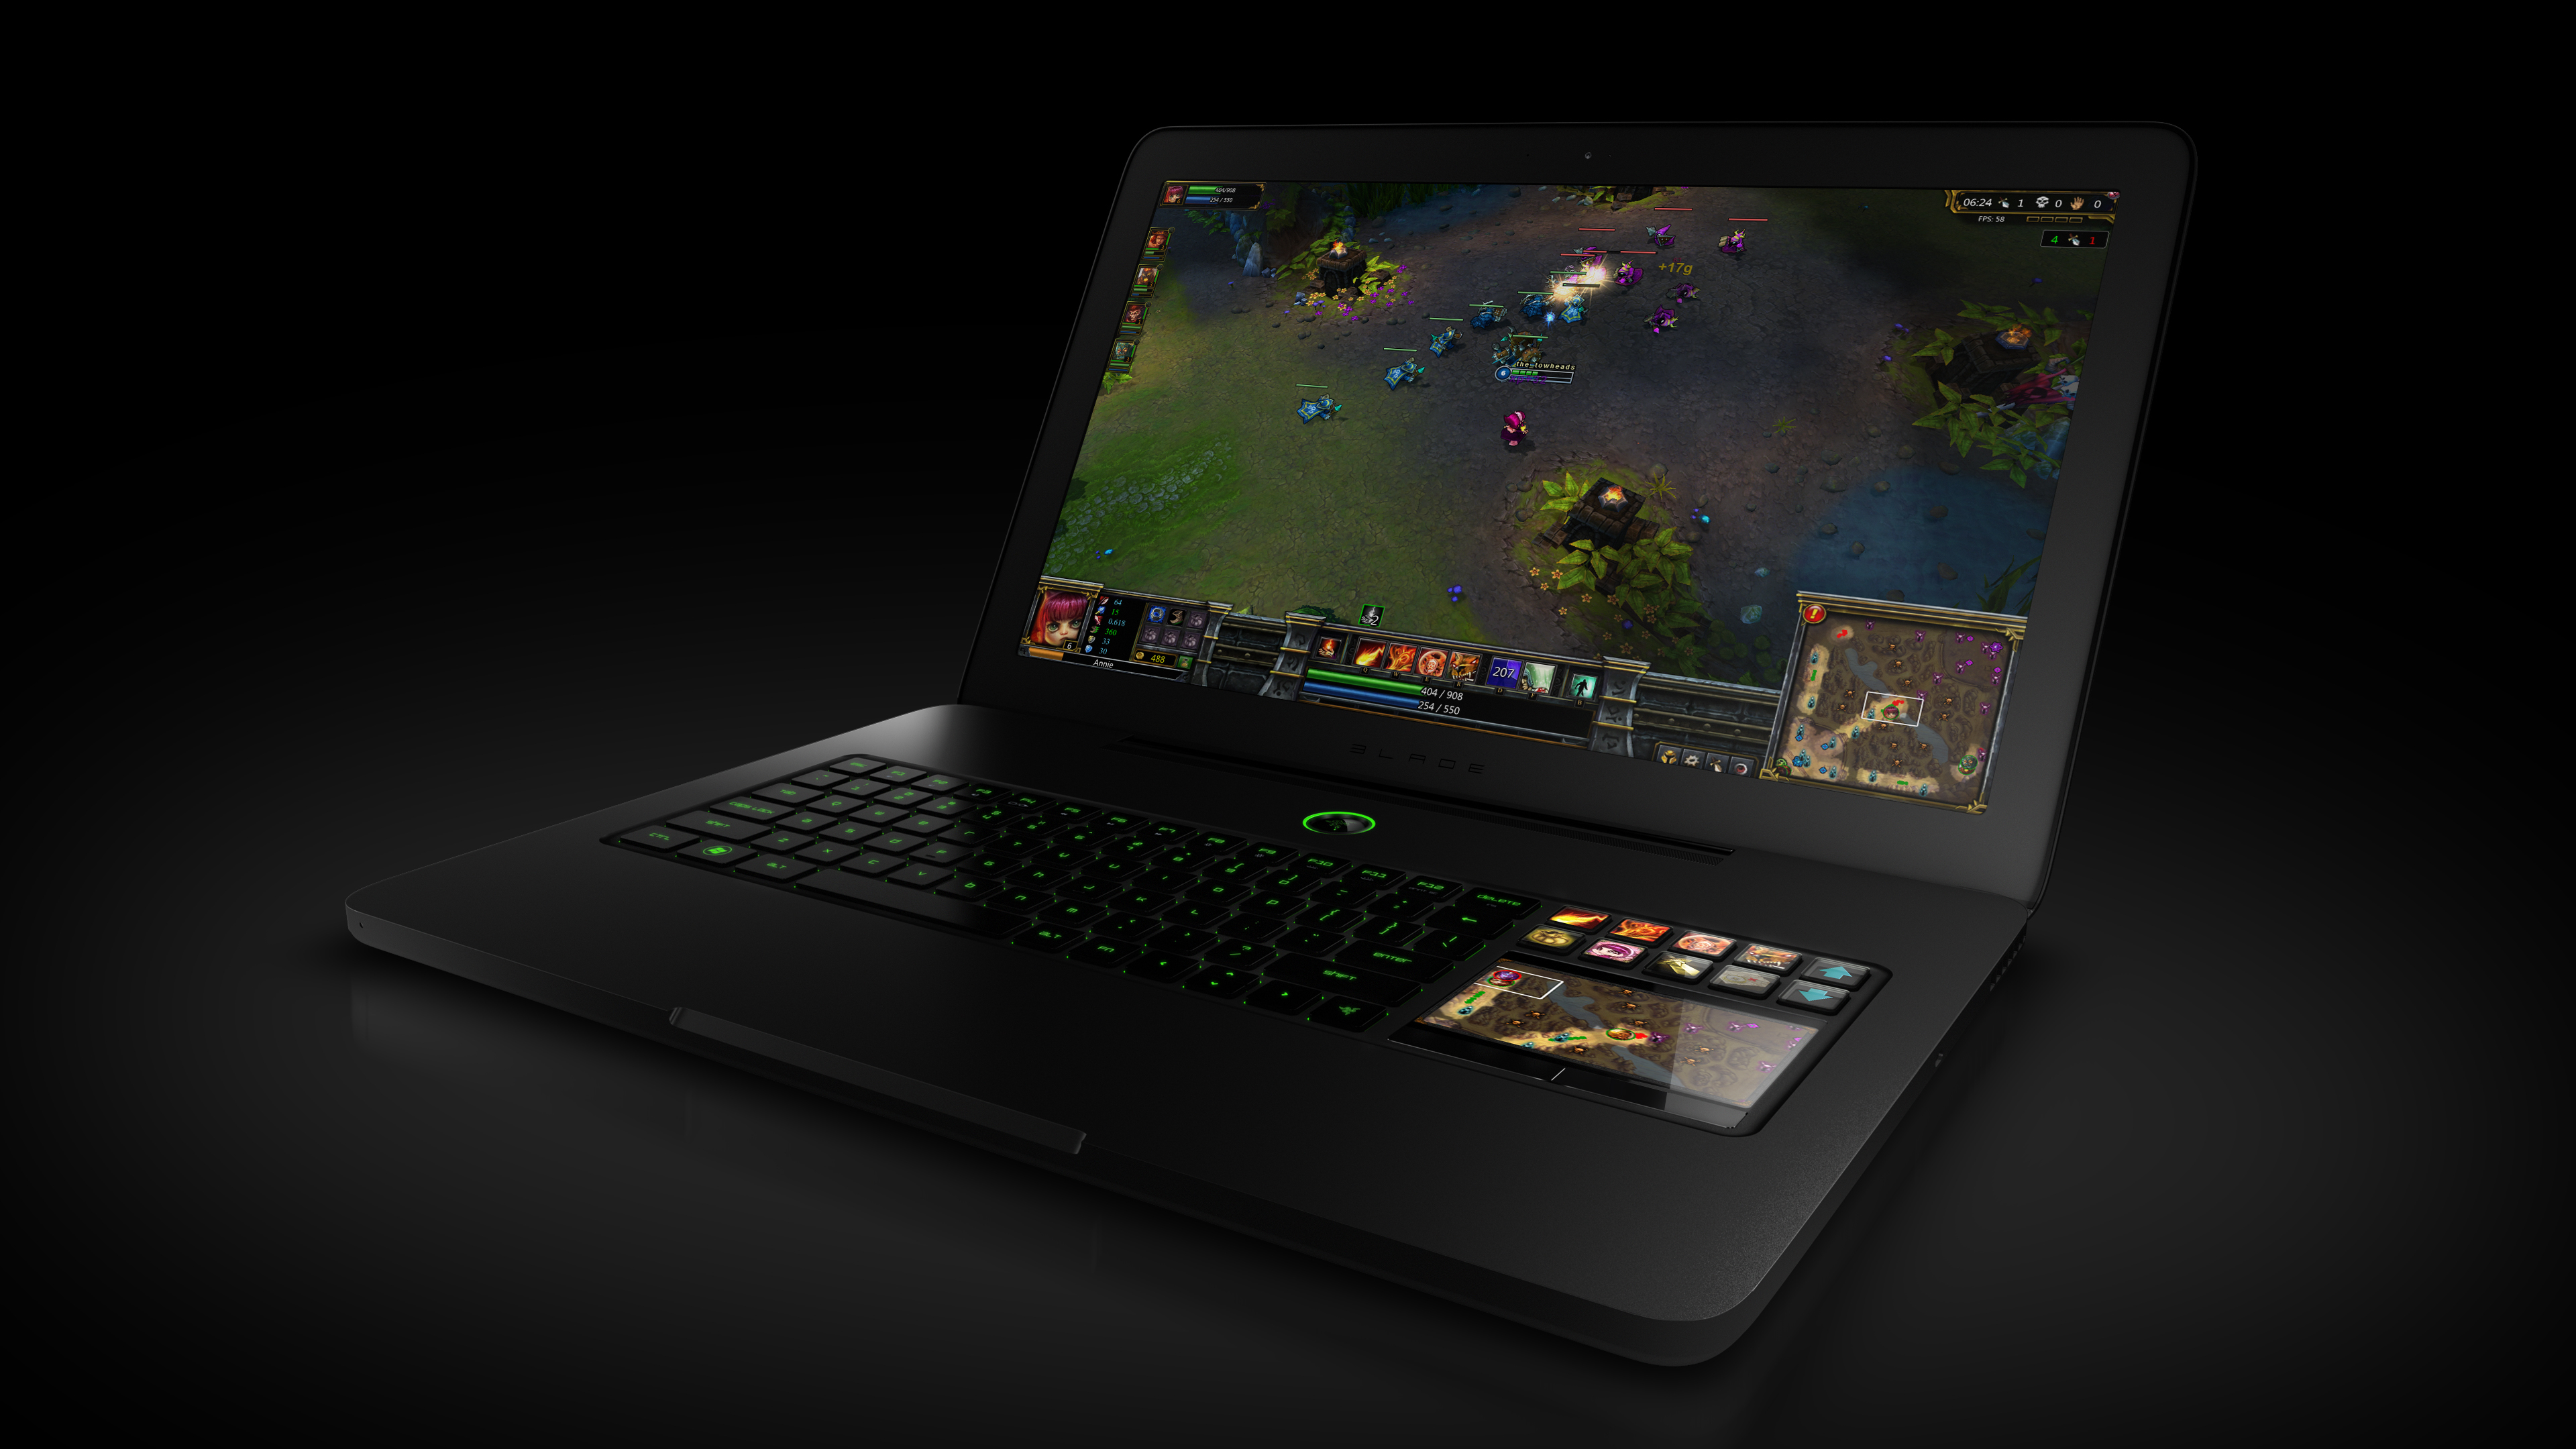 3840x2160 Razer Blade HD Wallpapers and Backgrounds